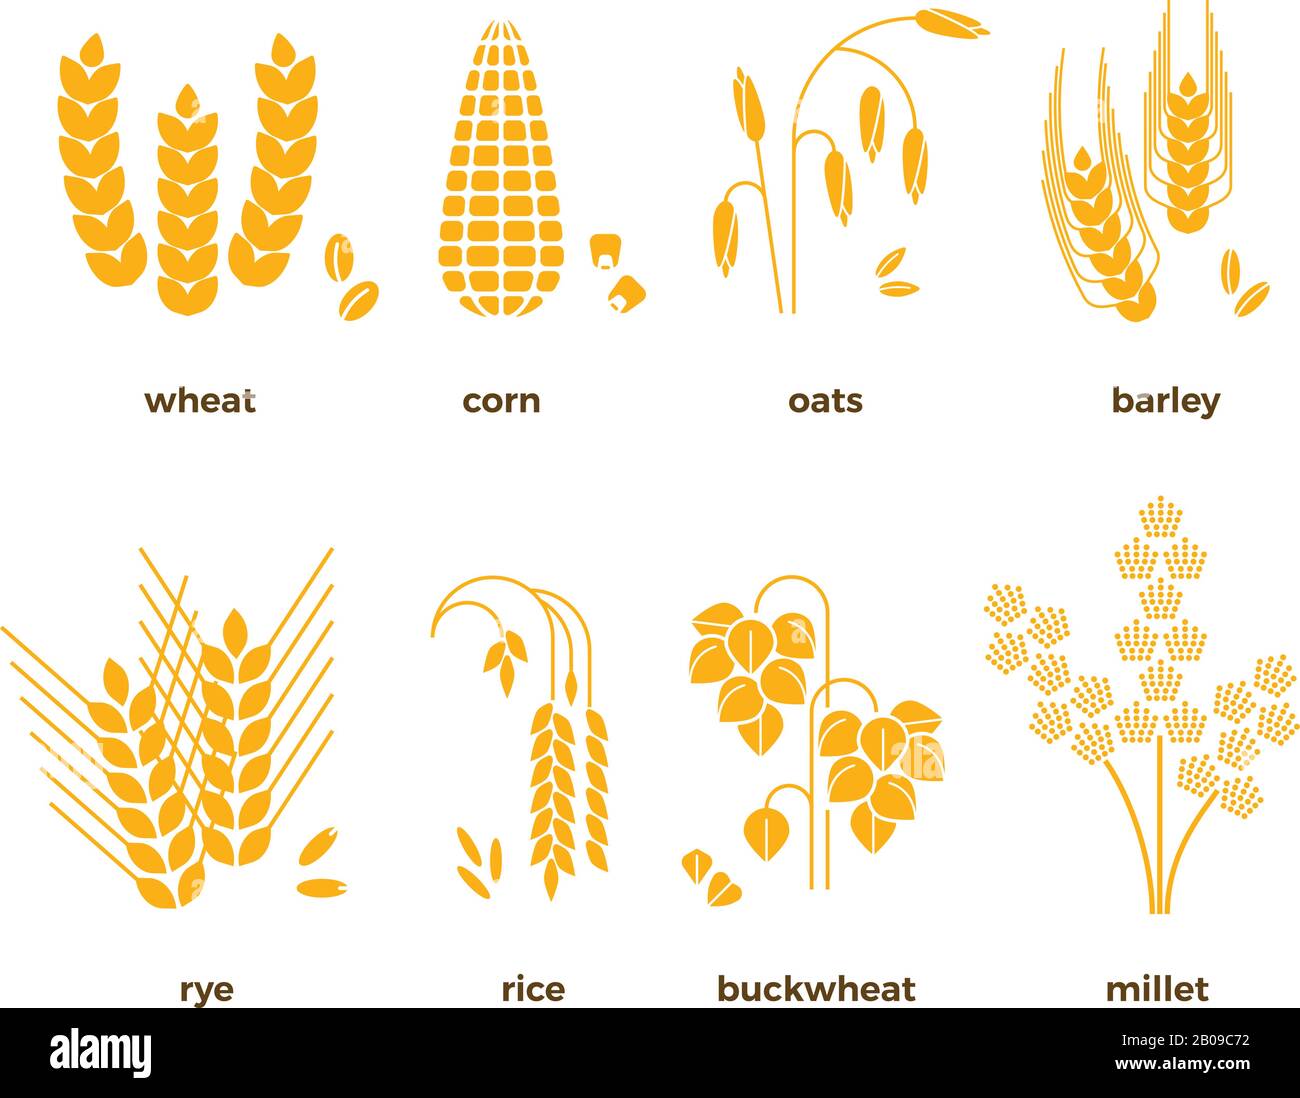 Cereal grains vector icons. Rice and wheat, corn and oats, rye and barley. Set of grain harvest, illustration of agriculture grains Stock Vector